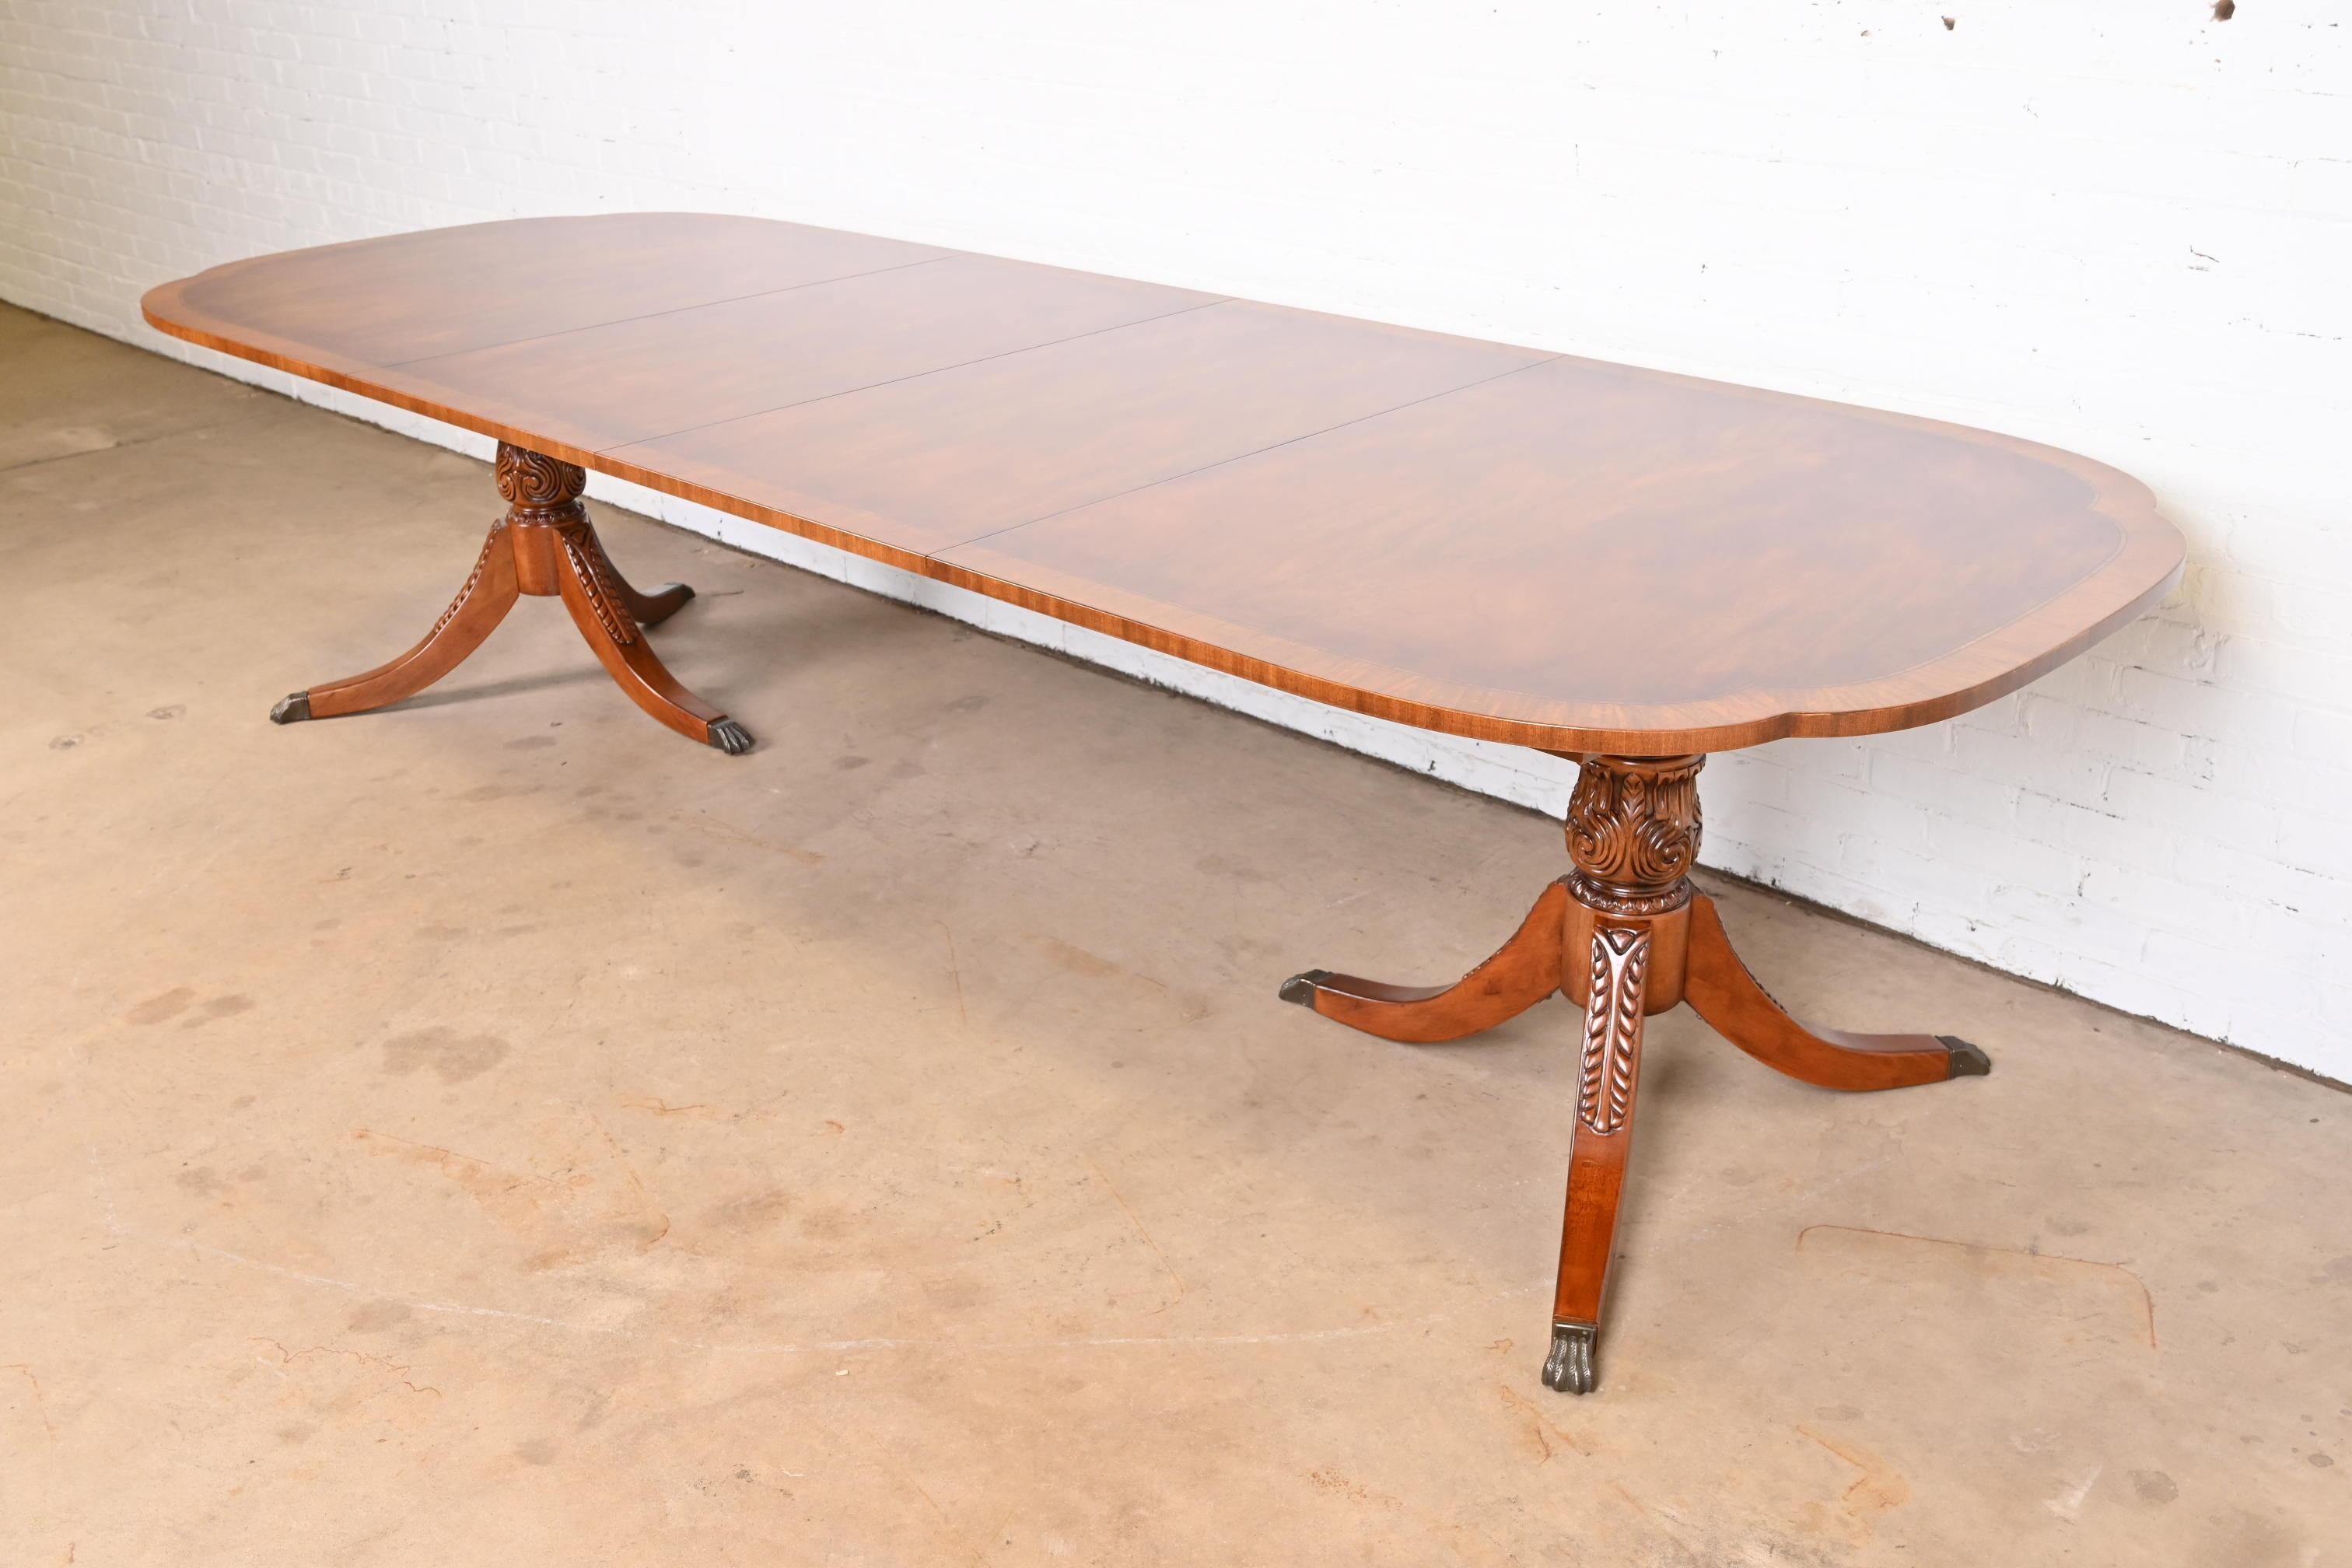 A gorgeous Georgian style double pedestal extension dining table

Very similar to the 